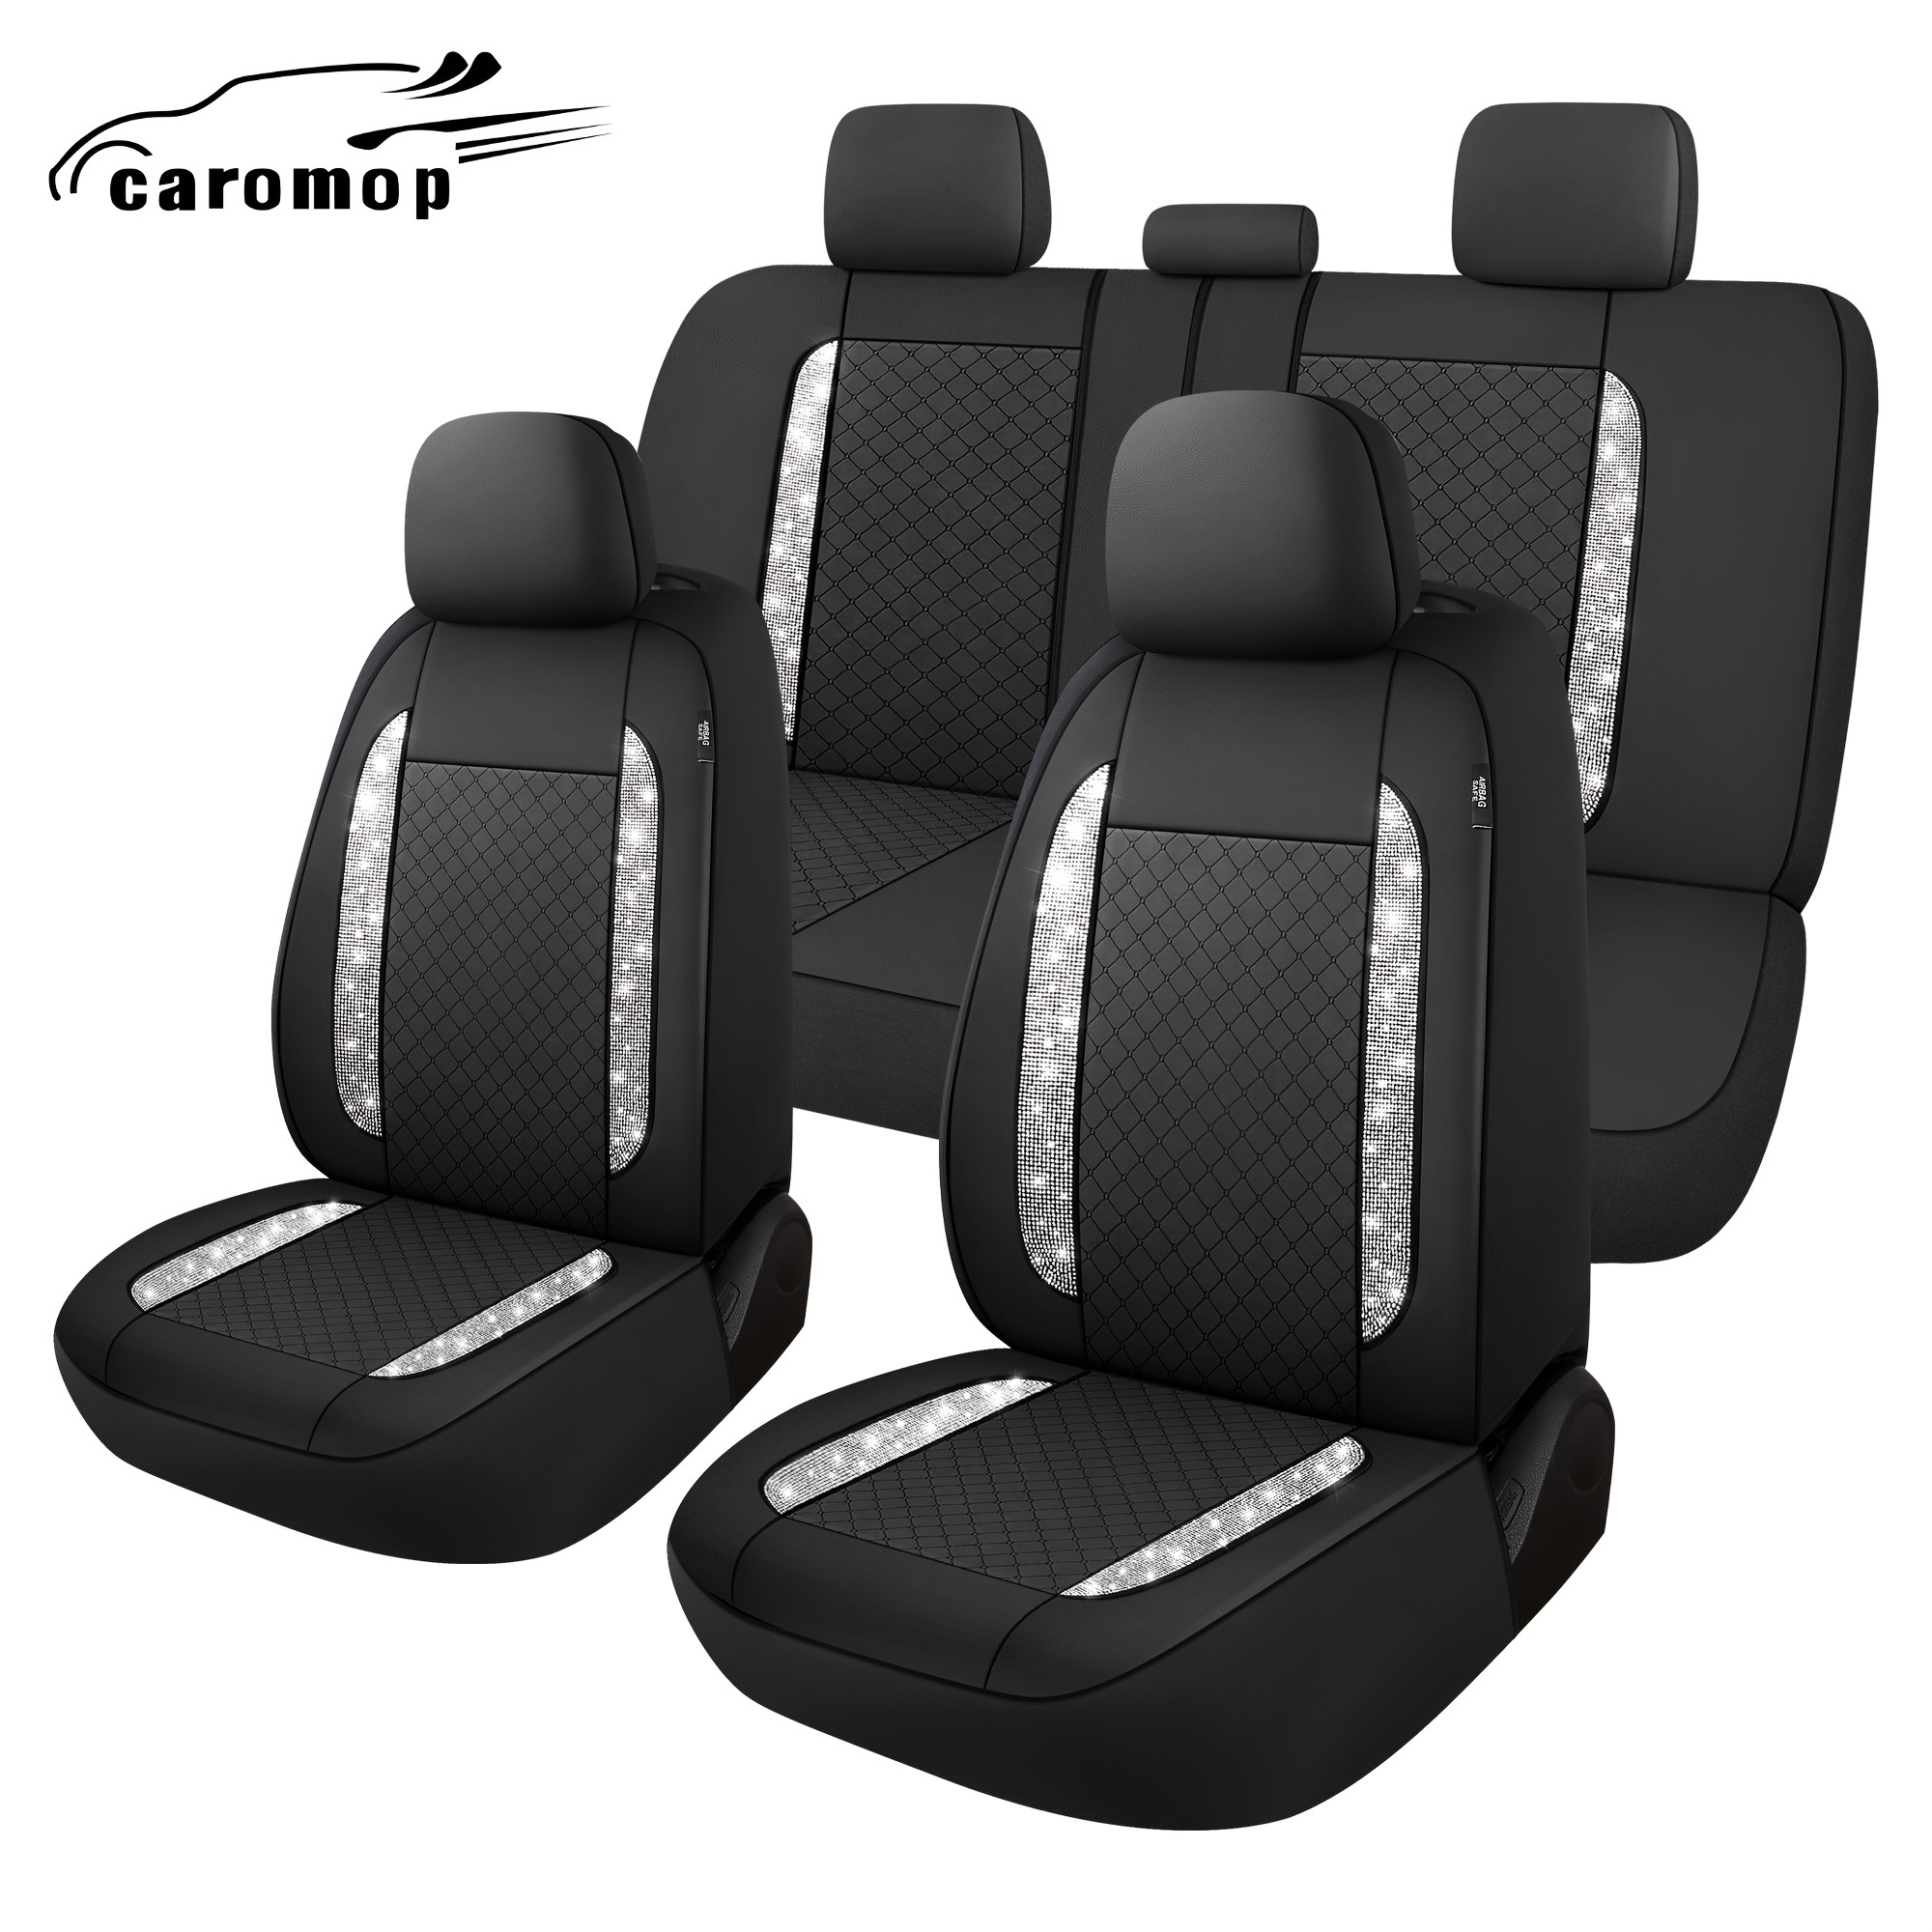 

Caromop Bling Diamond Pattern Leather Car Seat Covers 2 Front Interior Set- Shining Rhinestone Waterproof Automotive Seat Cover For Cars, Universal Fit Most Cars Sedans Suvs Trucks